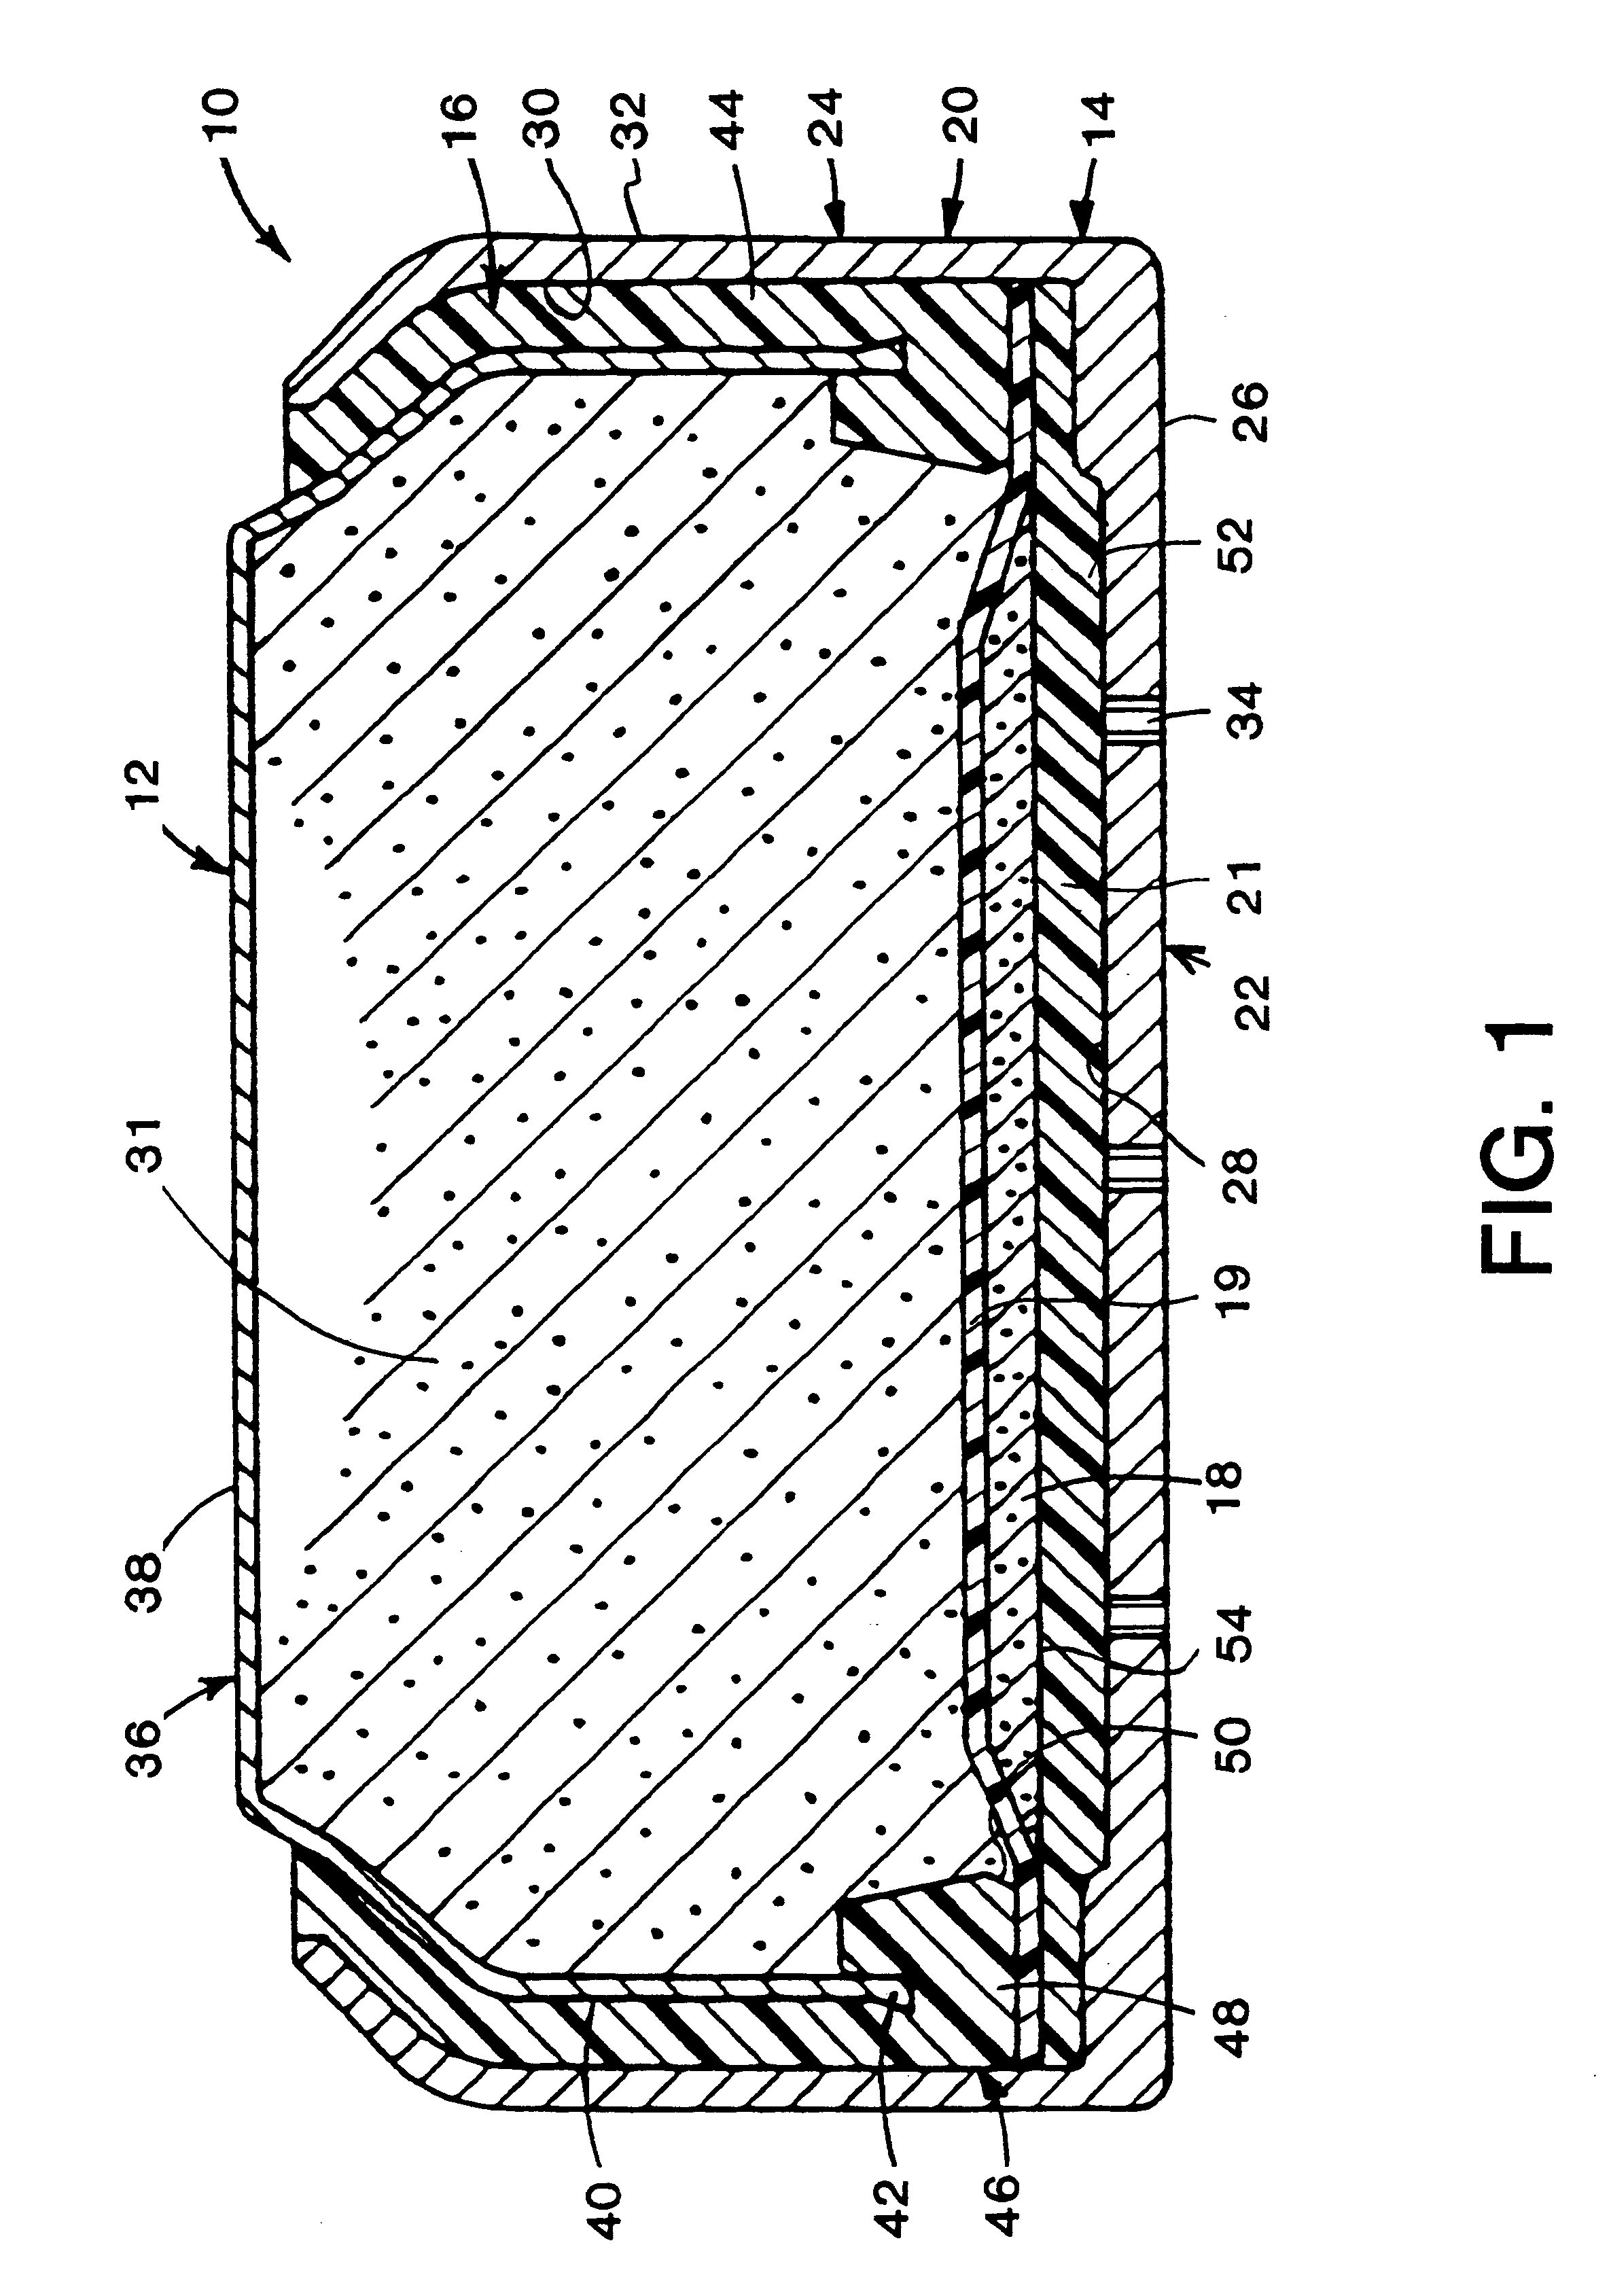 Metal-air cathode can, and electrochemical cell made therewith